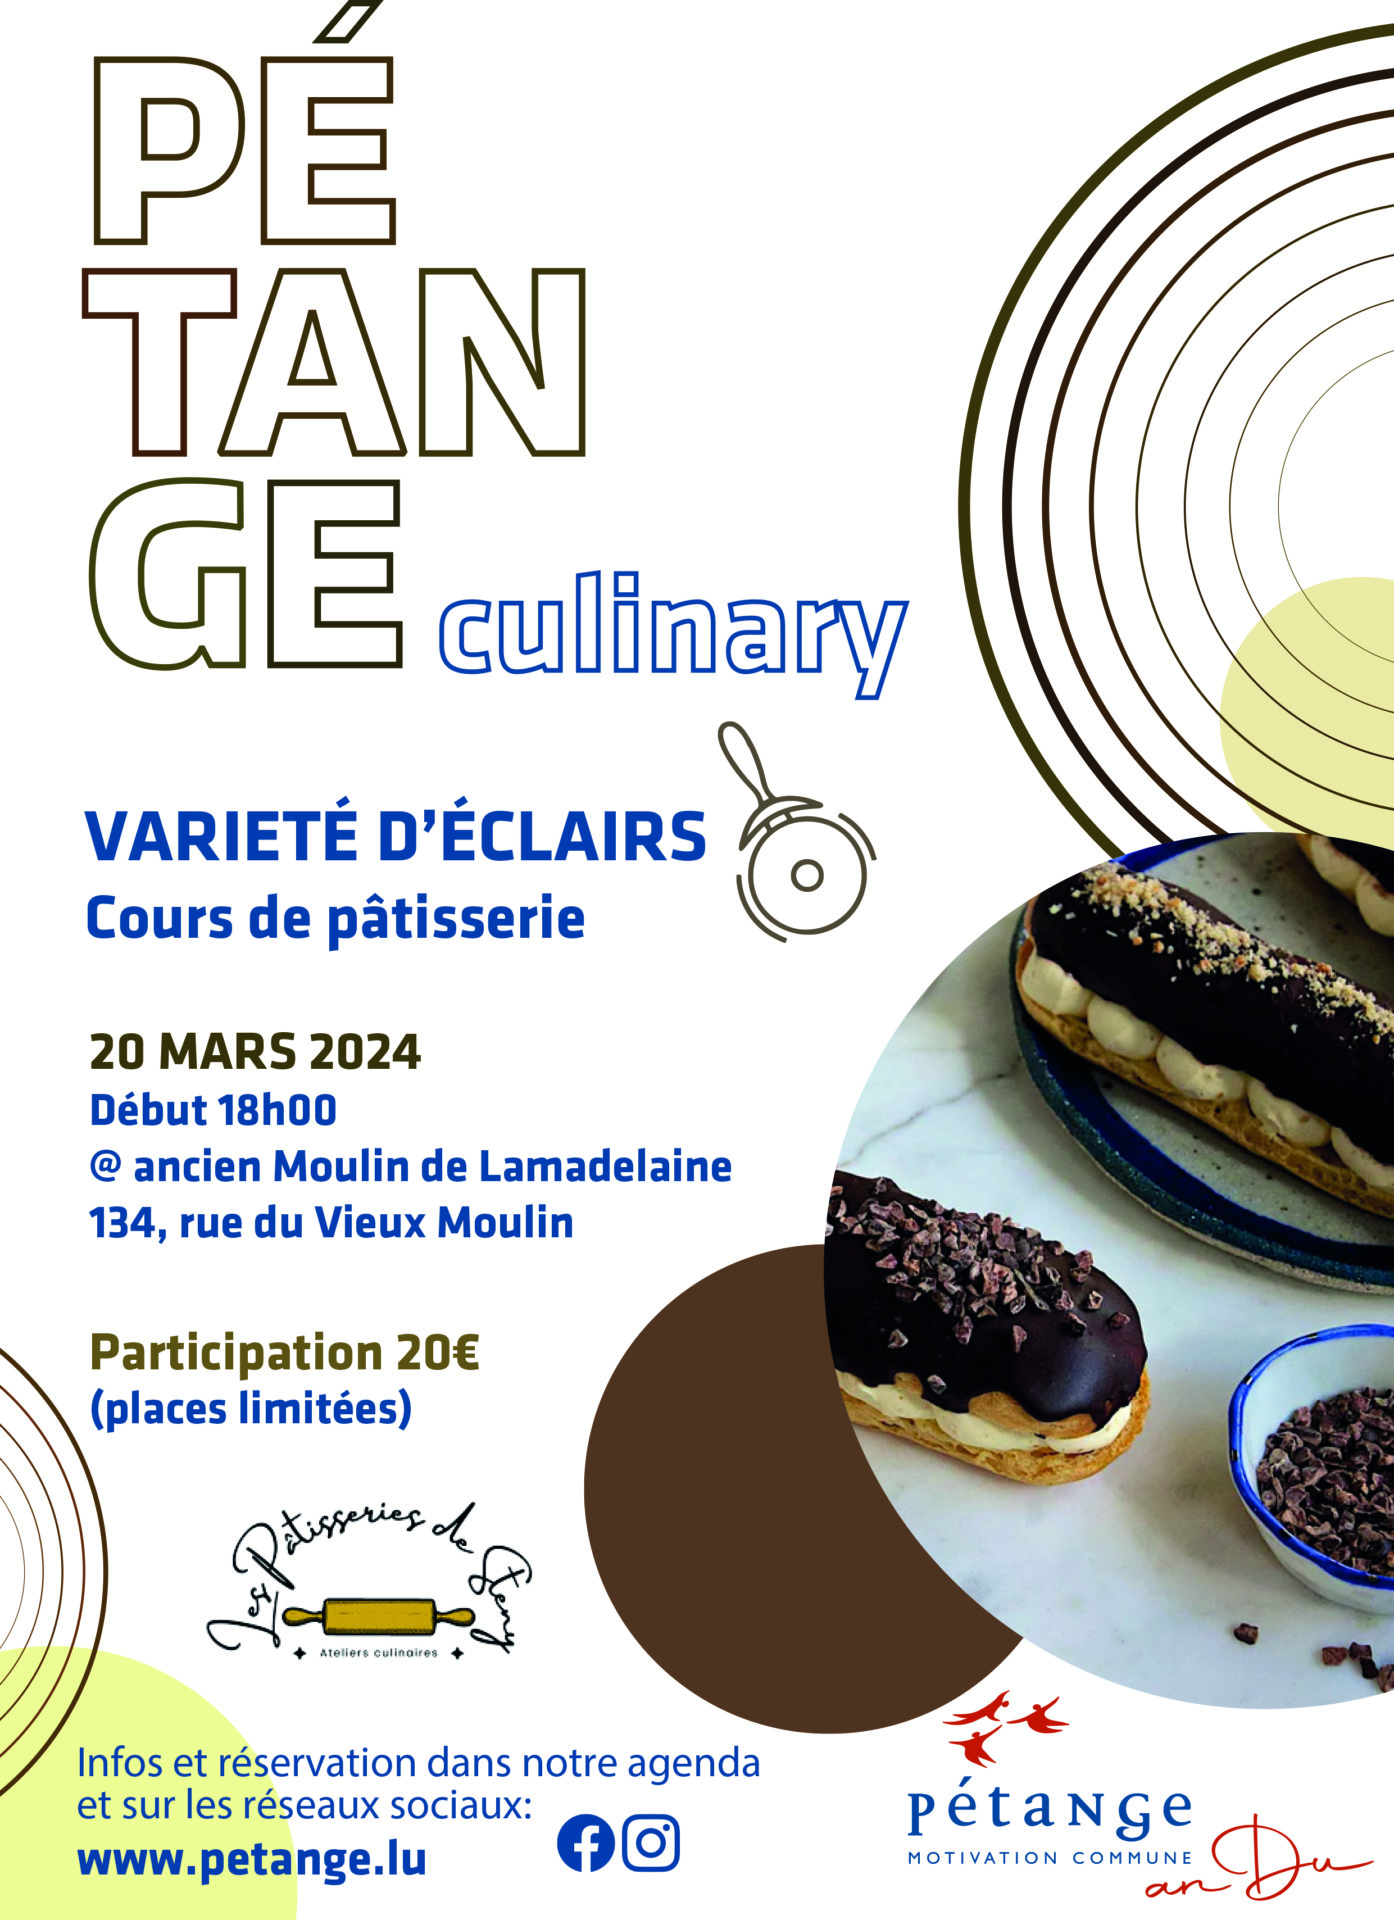 Petange Culinary & Pastry Course - SOLD out